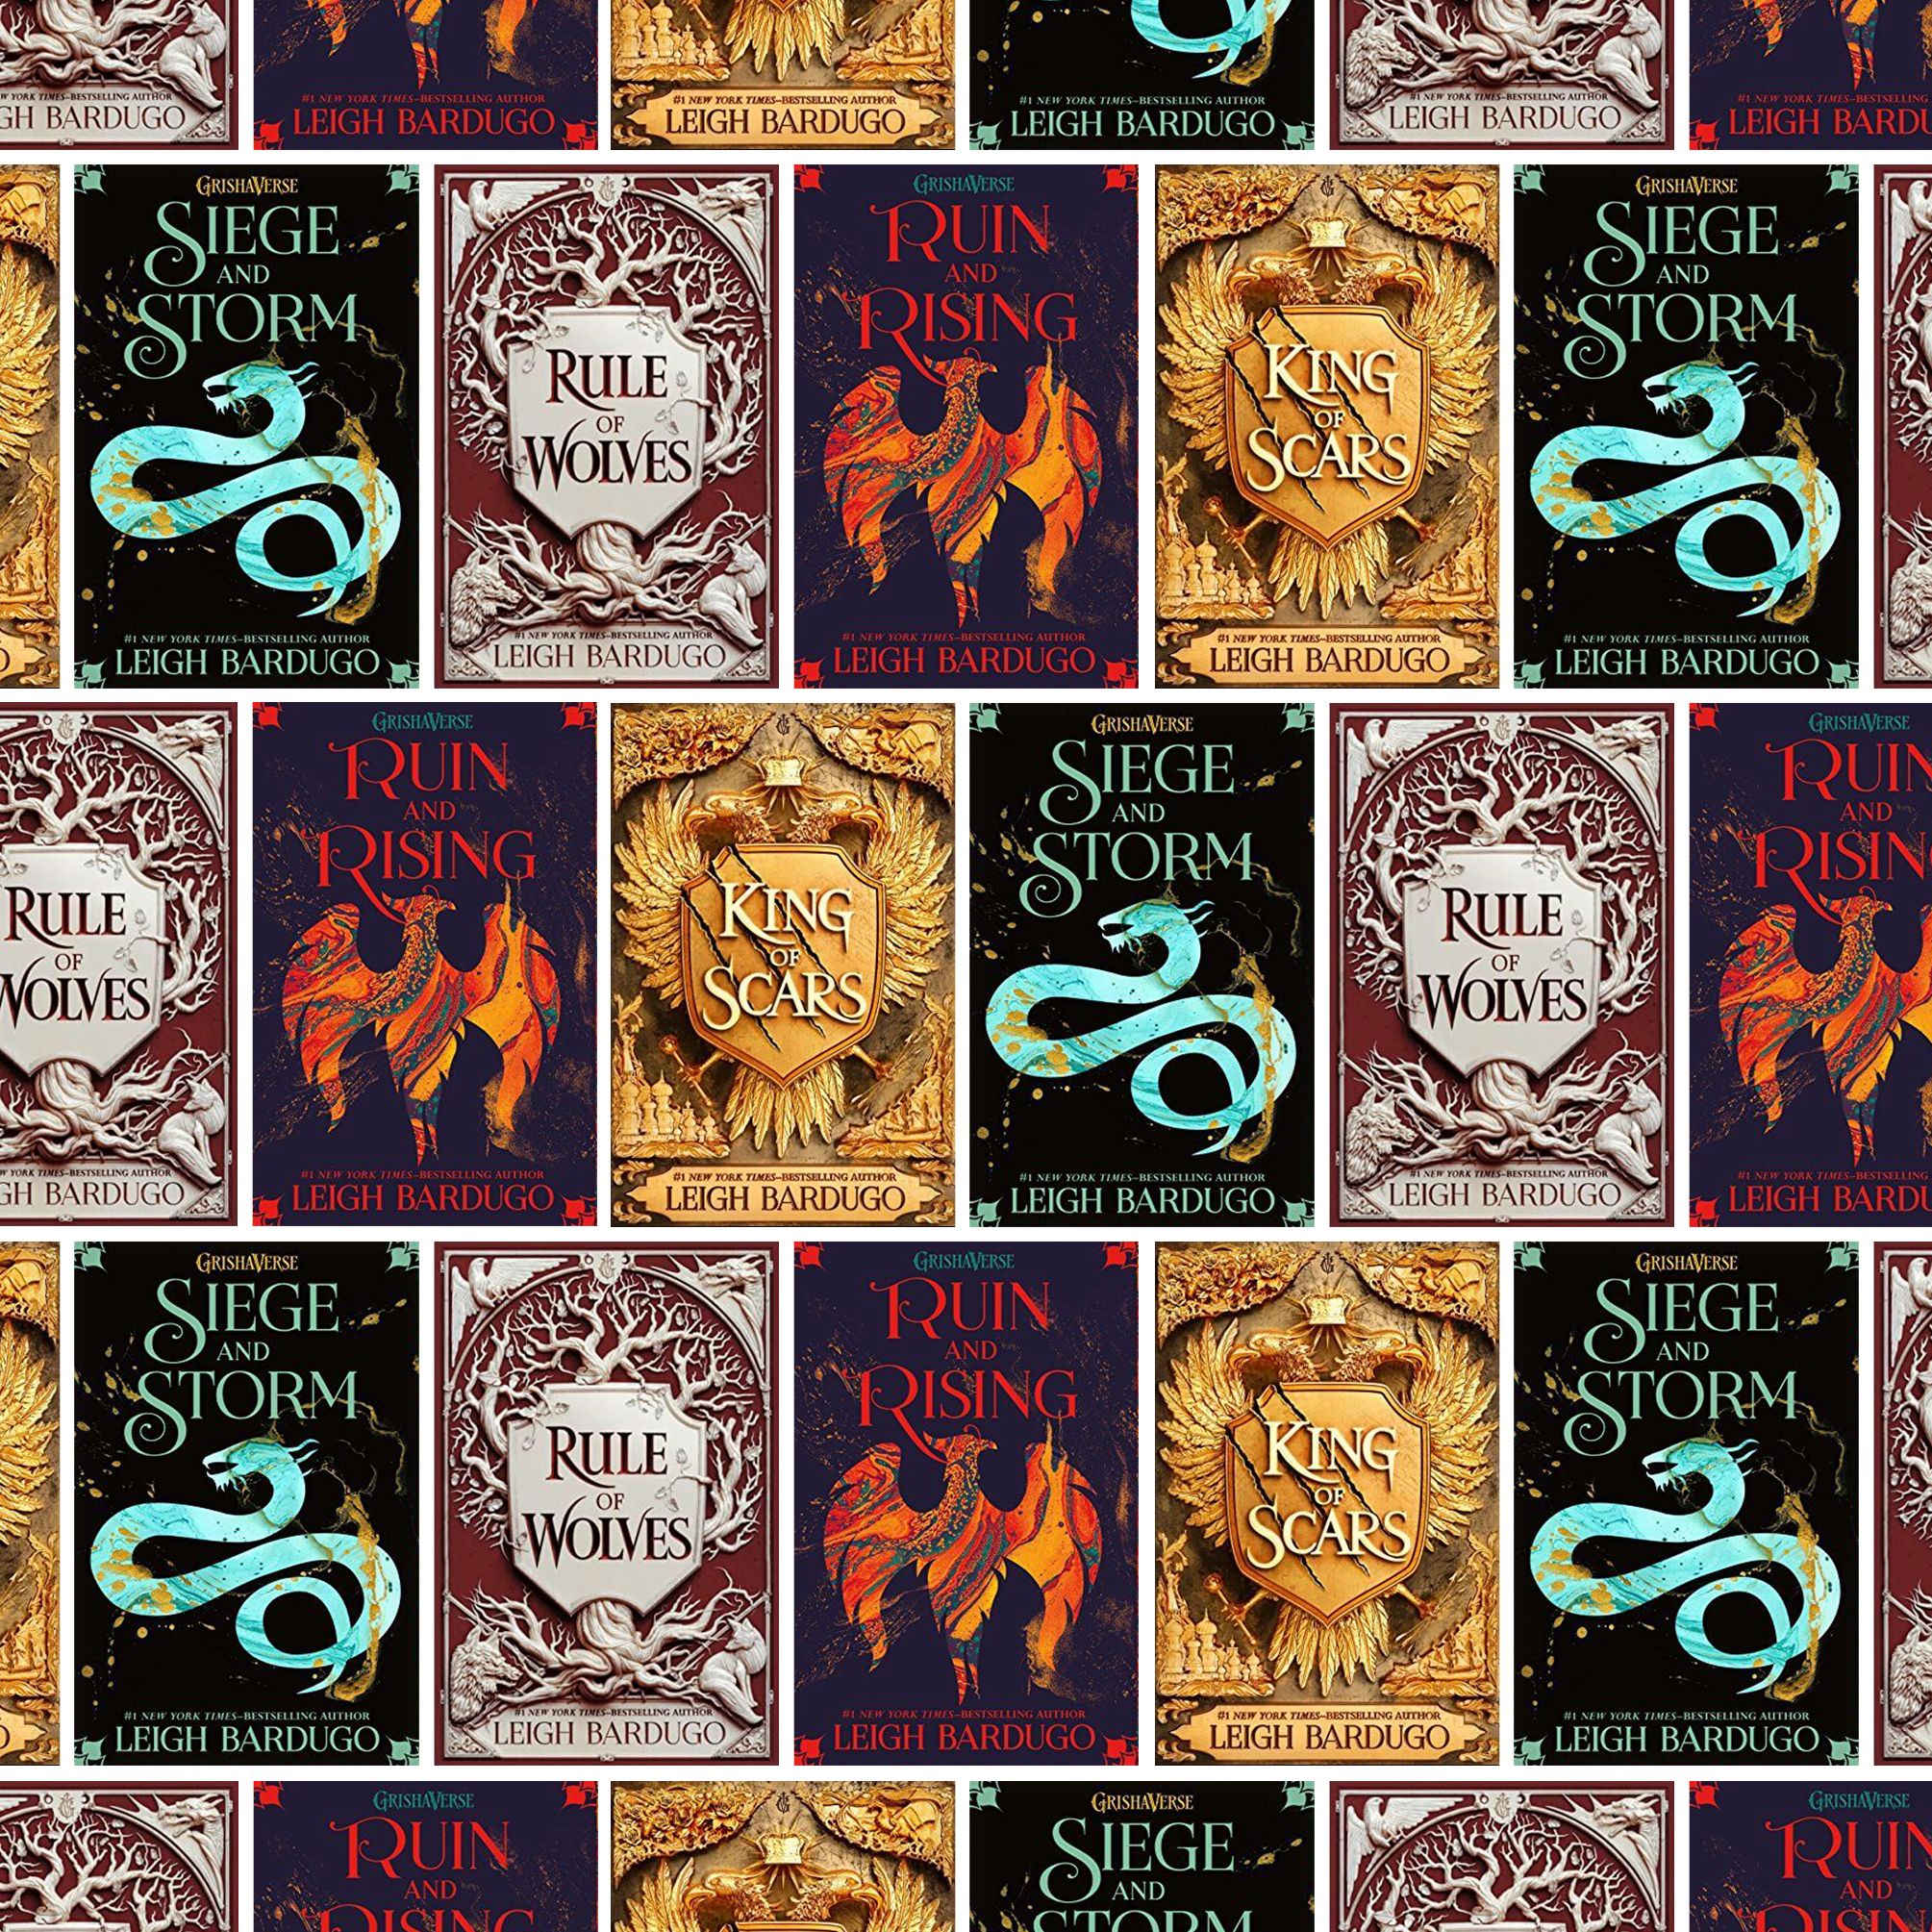 Shadow and Bone,' Explained